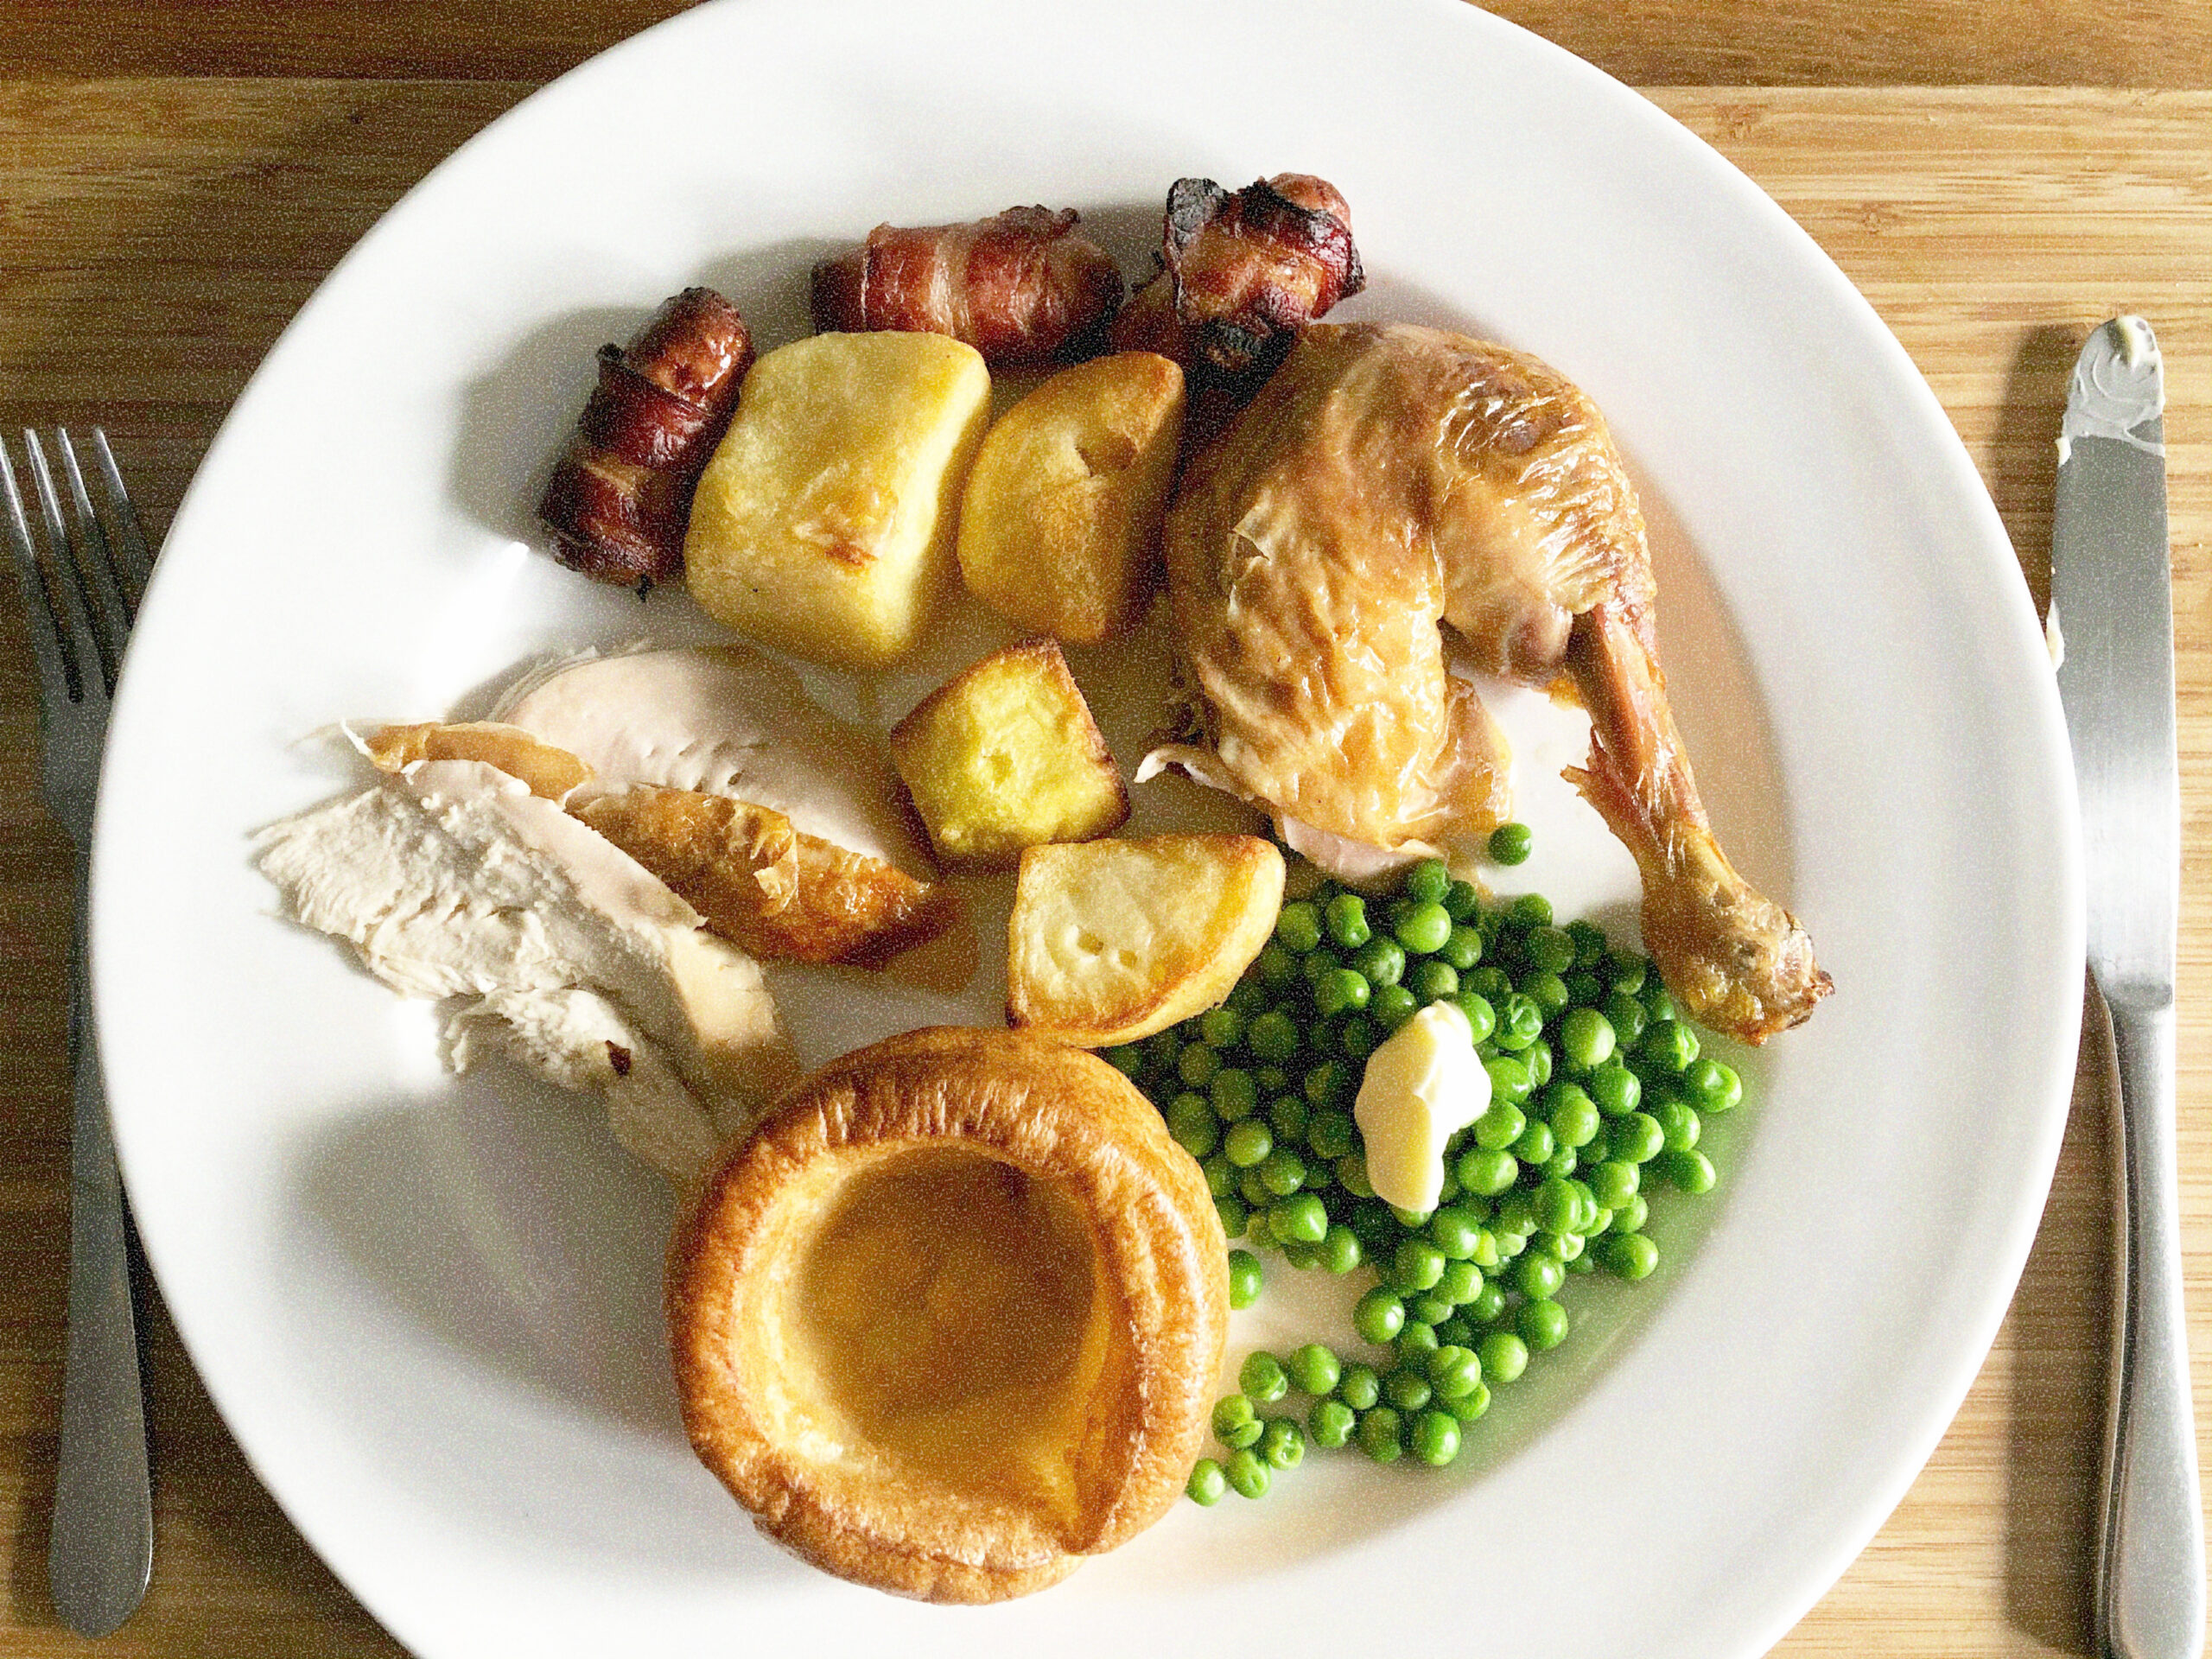 In praise of the Yorkshire pudding